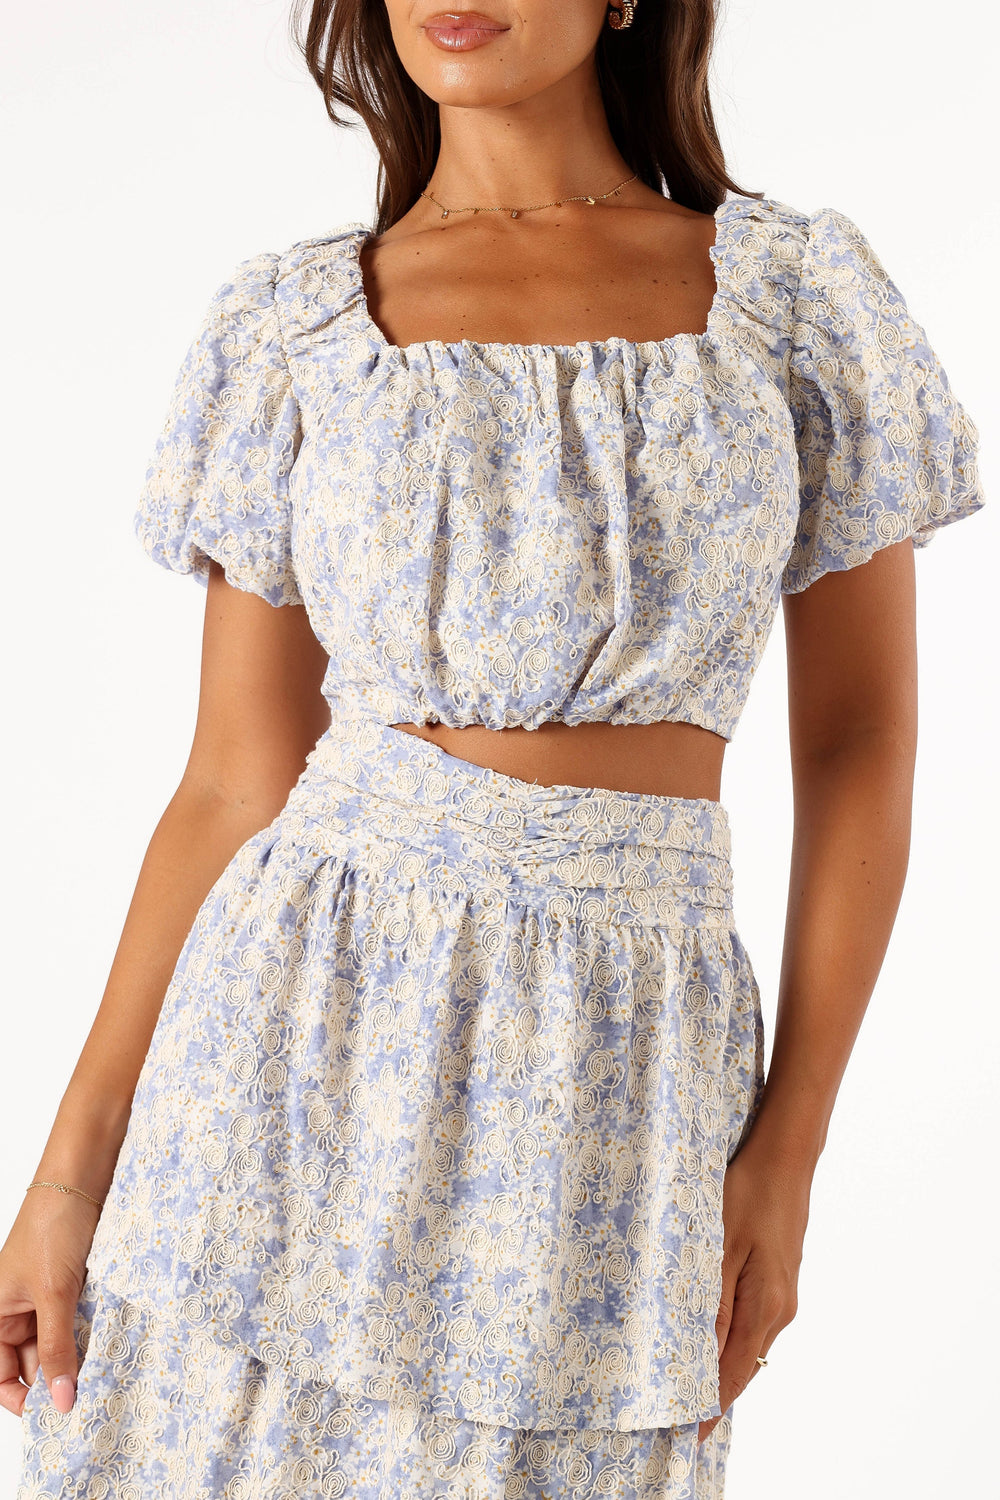 Petal and Pup USA SETS Breanna Two Piece Set - Dusty Blue